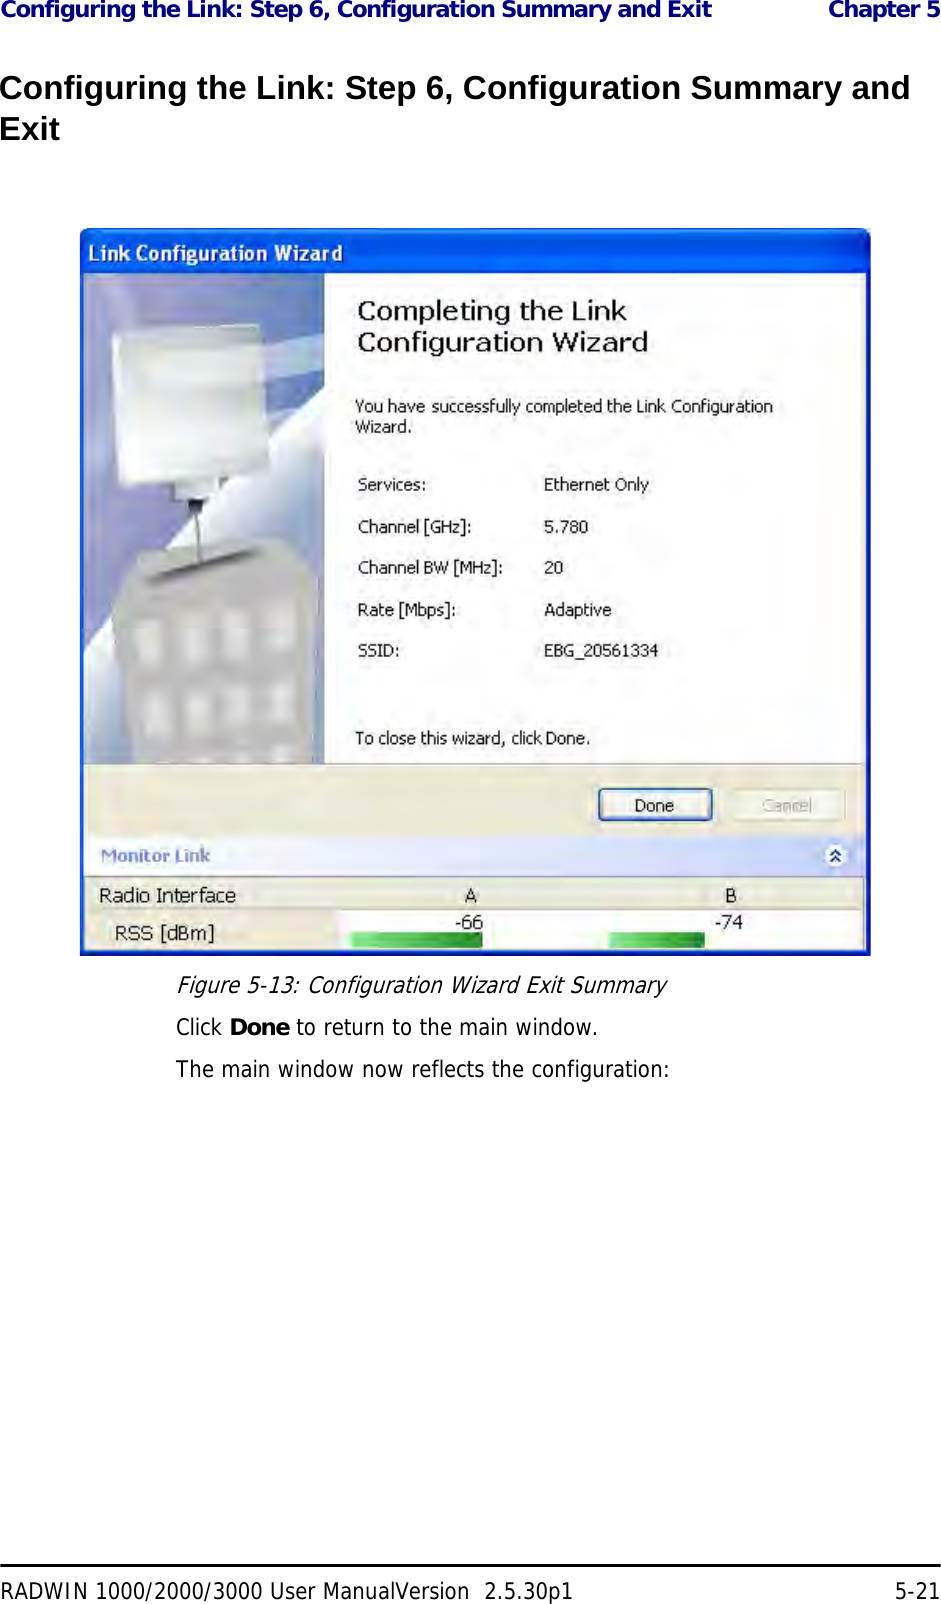 Configuring the Link: Step 6, Configuration Summary and Exit  Chapter 5RADWIN 1000/2000/3000 User ManualVersion  2.5.30p1 5-21Configuring the Link: Step 6, Configuration Summary and ExitFigure 5-13: Configuration Wizard Exit Summary Click Done to return to the main window.The main window now reflects the configuration: